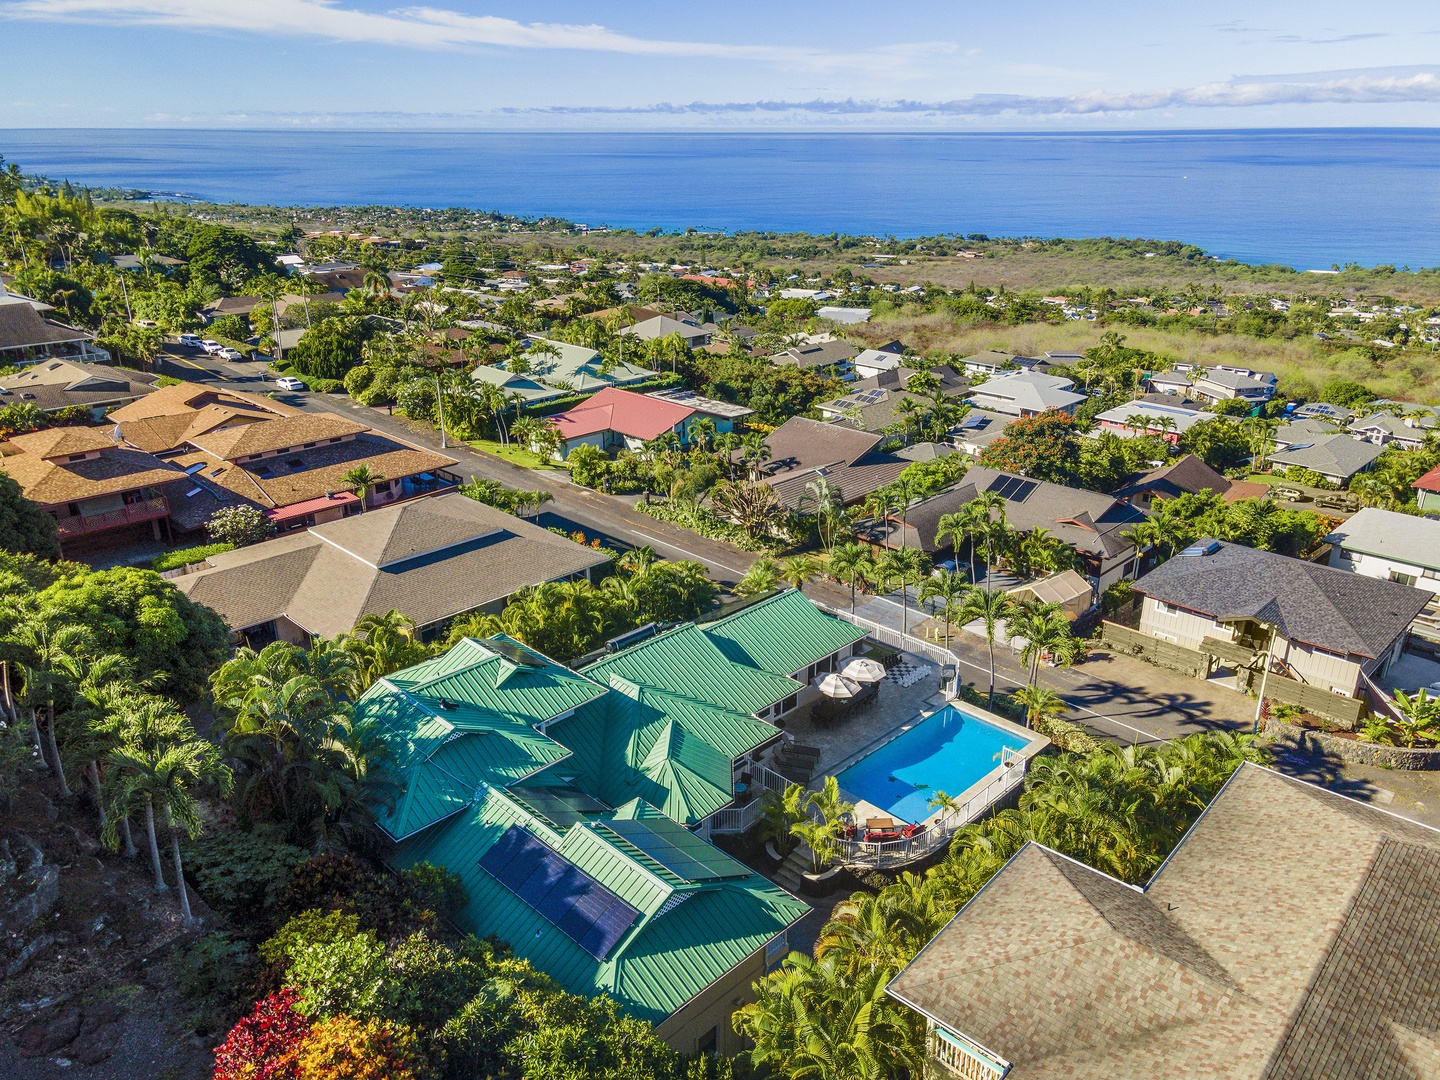 Kailua-Kona Vacation Rentals, Honu Hale - Aerials of the property and surrounding homes